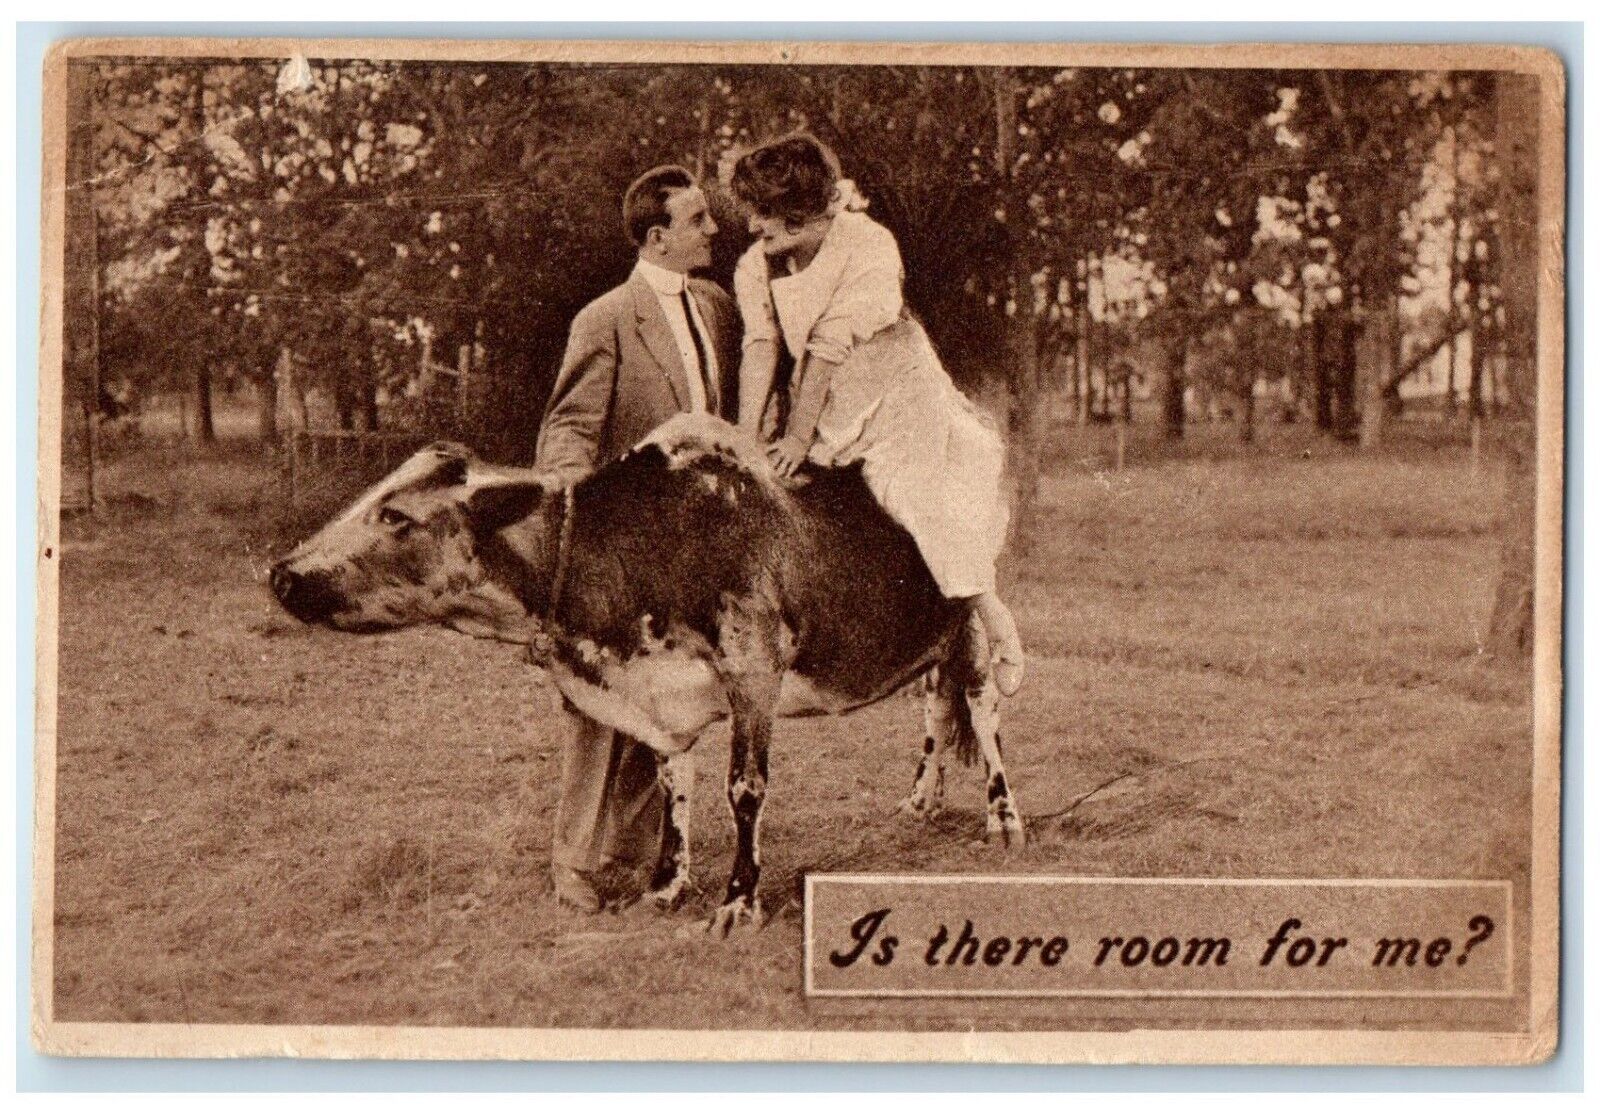 c1910s Sweet Couple Romance Is There Room For Me Chestertown NY Antique Postcard